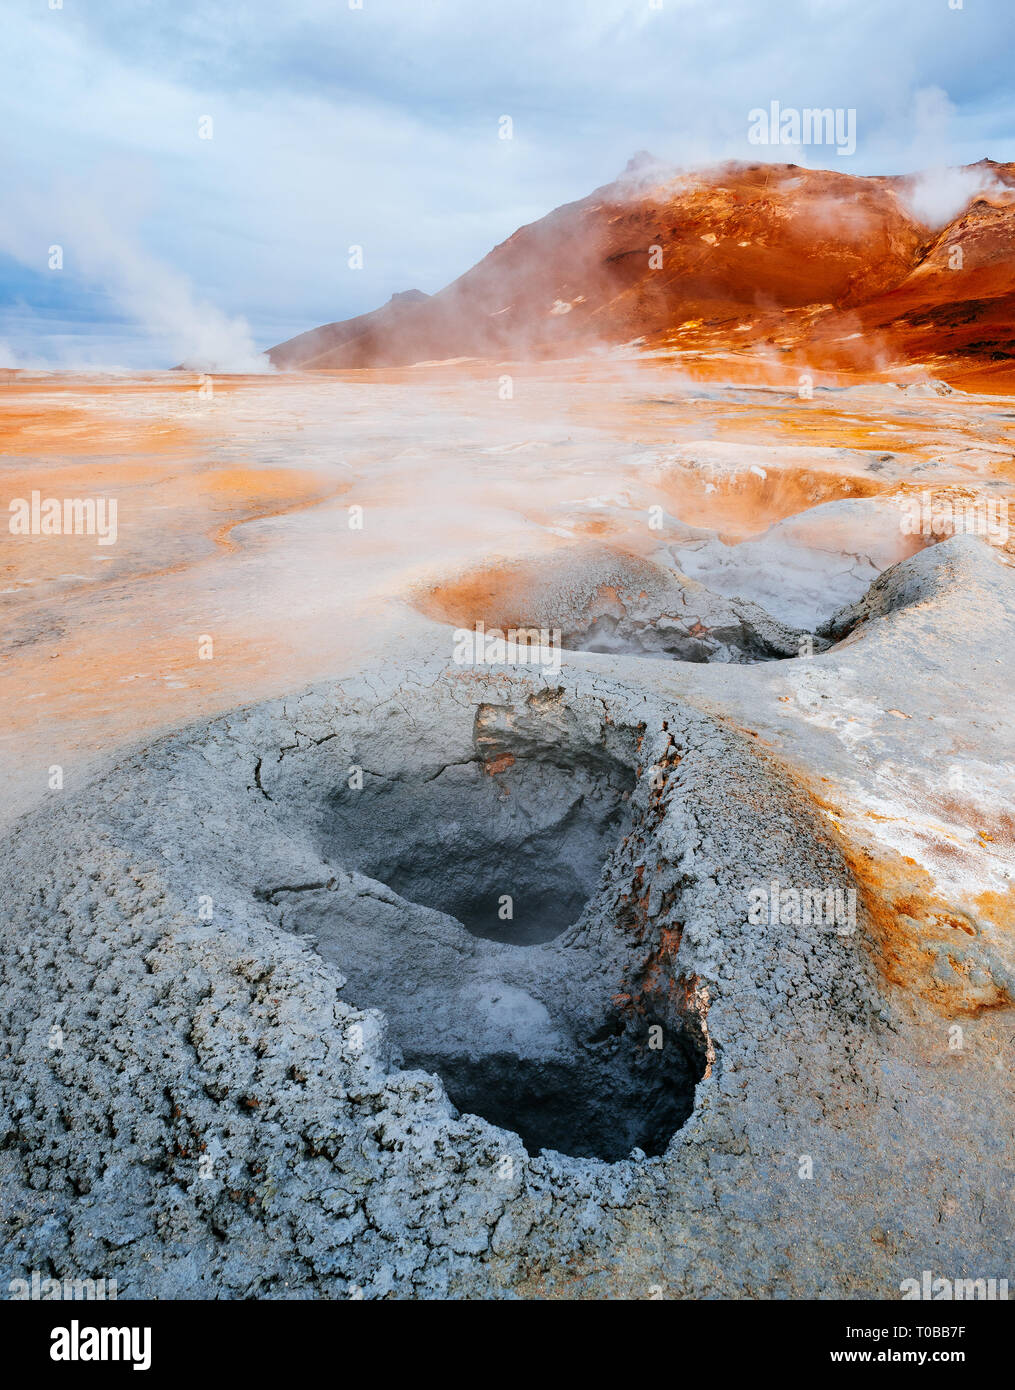 Namafjall - geothermal area in field of Hverir. Landscape which pools of boiling mud and hot springs. Tourism and natural attractions in Iceland Stock Photo